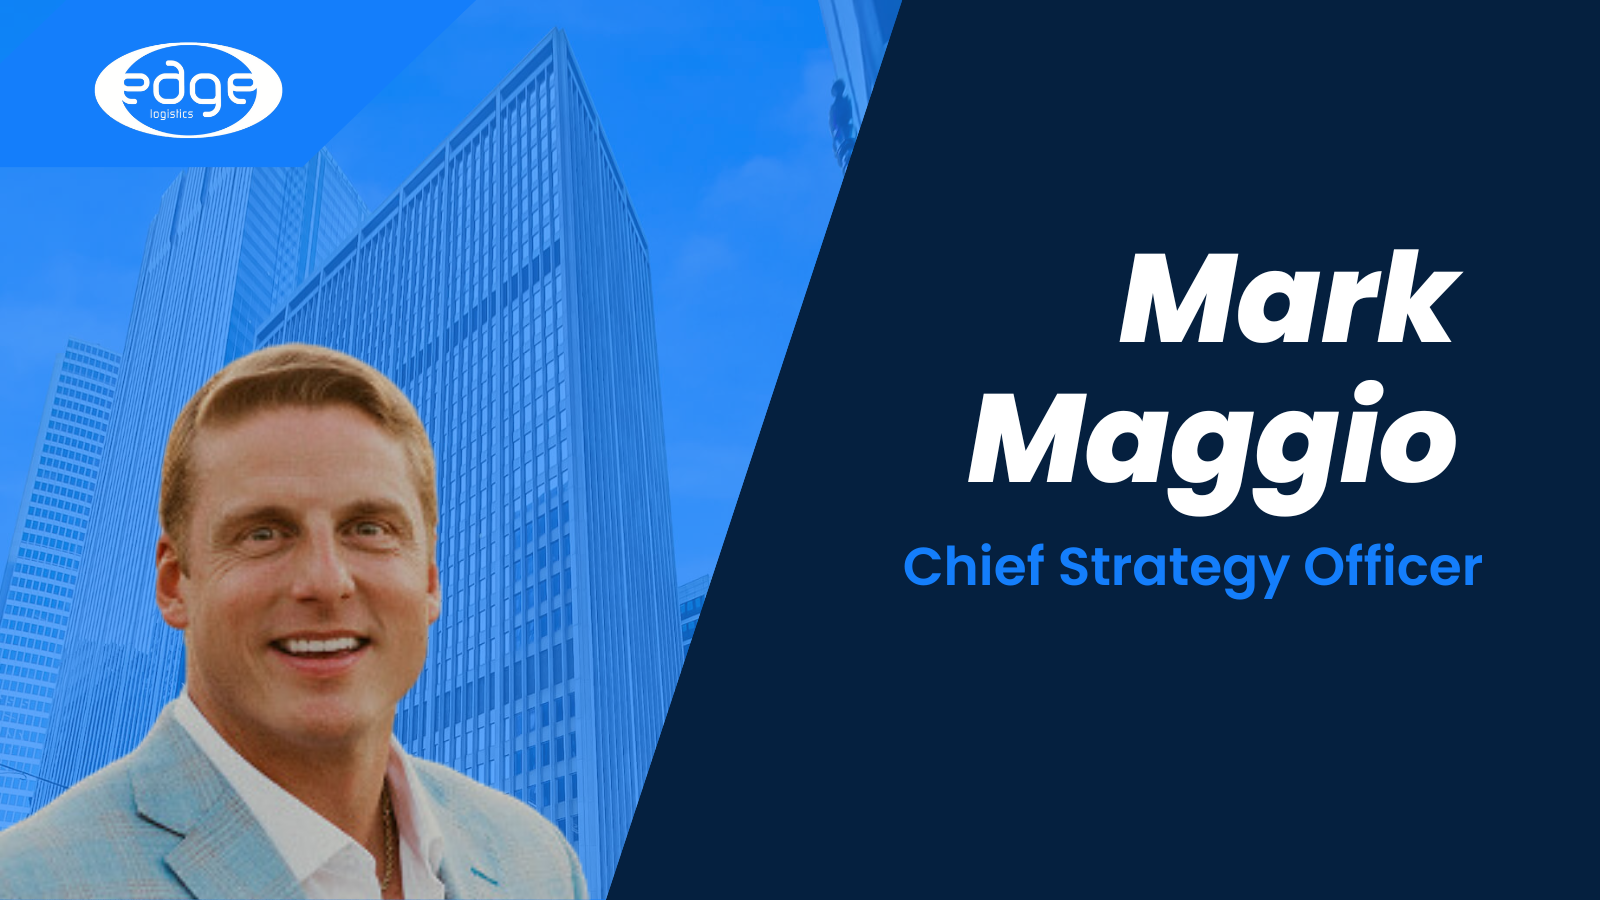 New Chief Strategy Officer Mark Maggio’s Vision: Build Edge Logistics into a Top 20 Brokerage in 3 Years